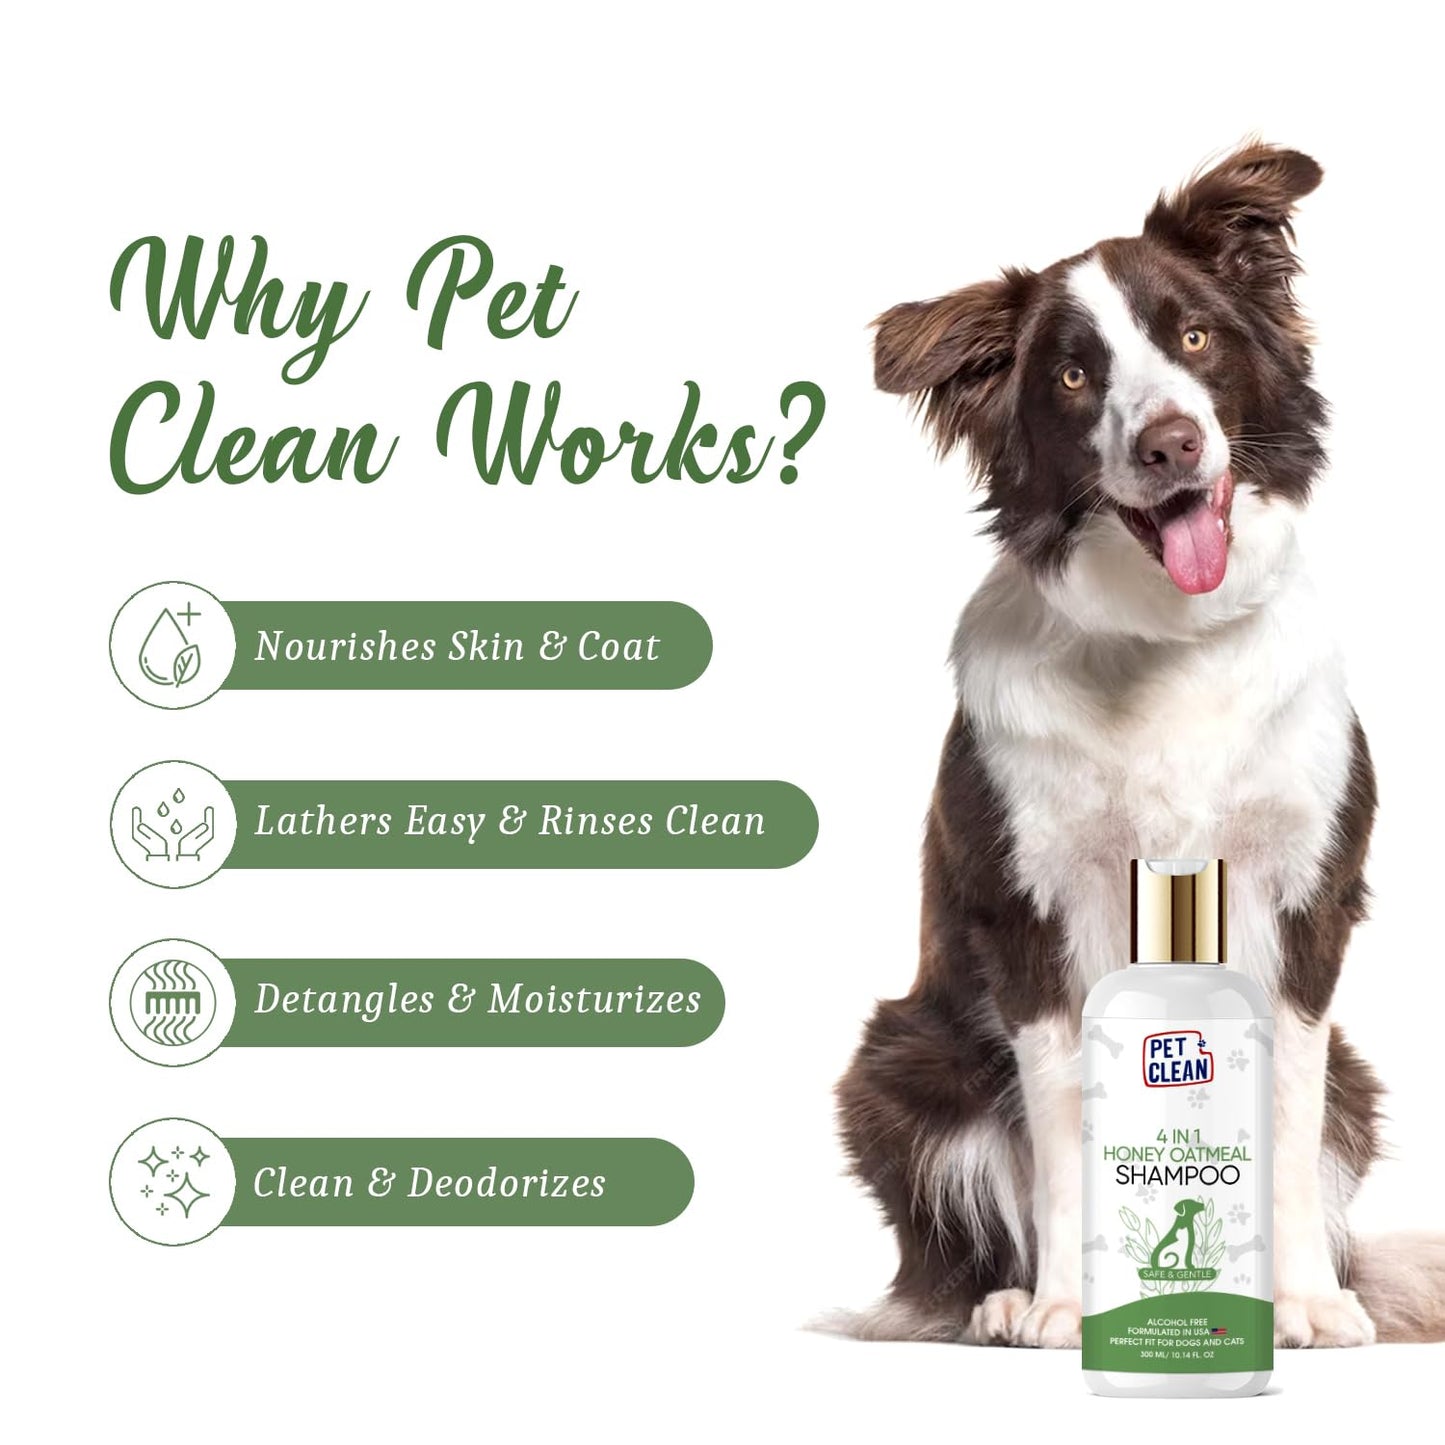 Pet Clean 4-in-1 Oatmeal Shampoo for Dog for Dry, Itchy & Sensitive Skin, Complete Coat Care for Cats and Other Pets (300 ml, Honey and Oatmeal)